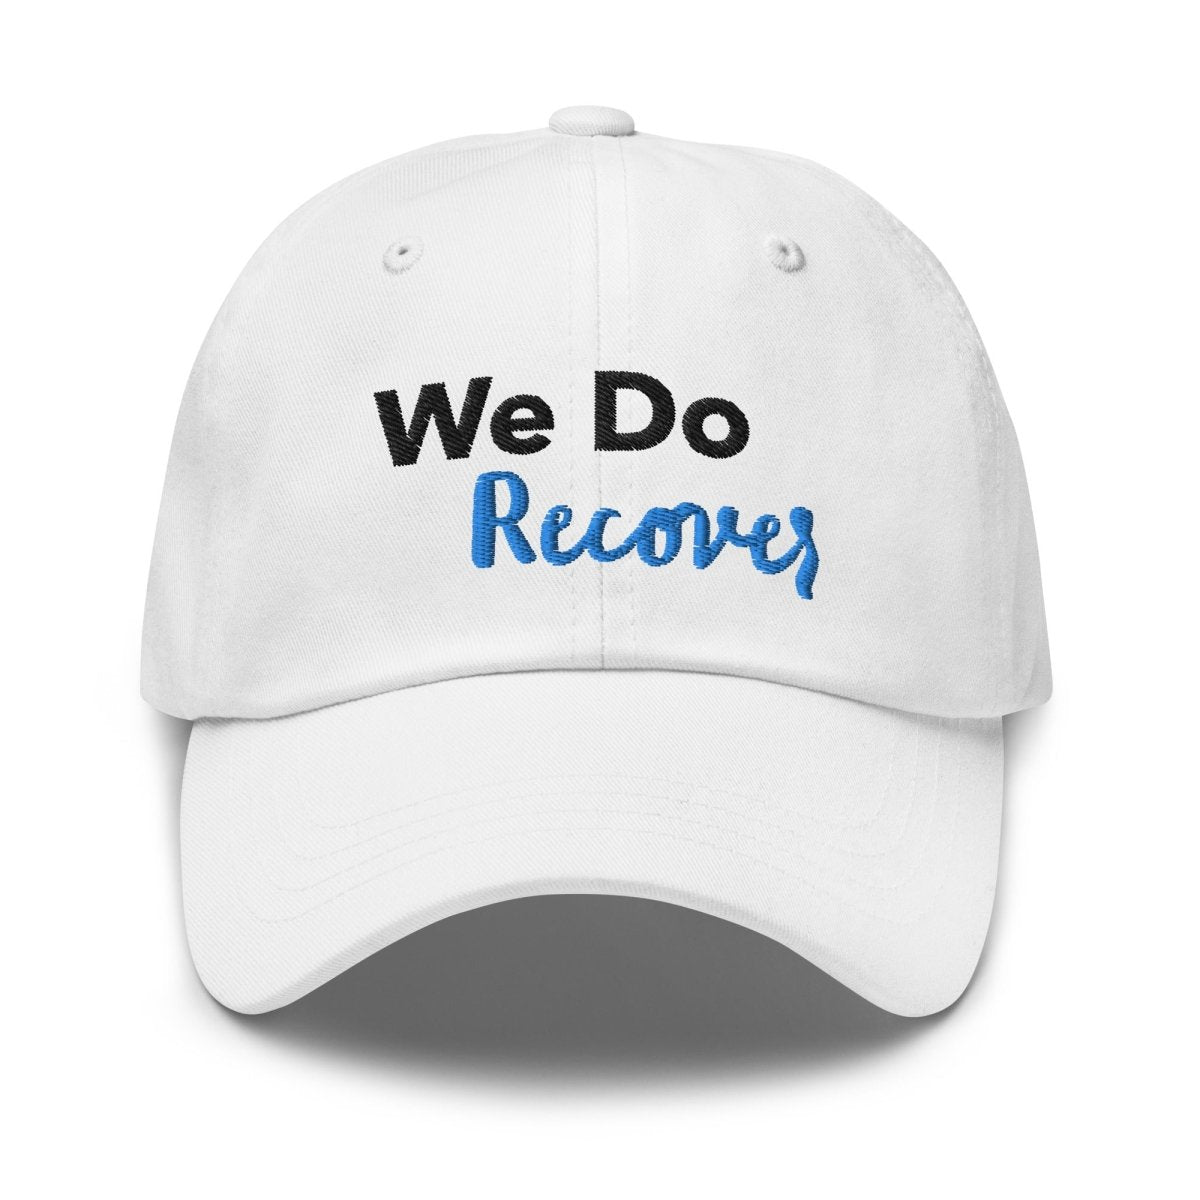 We Do Recover Dad Hat: Celebrate Sobriety and Empower Your Community with Fashion (Light Colors) - Sobervation